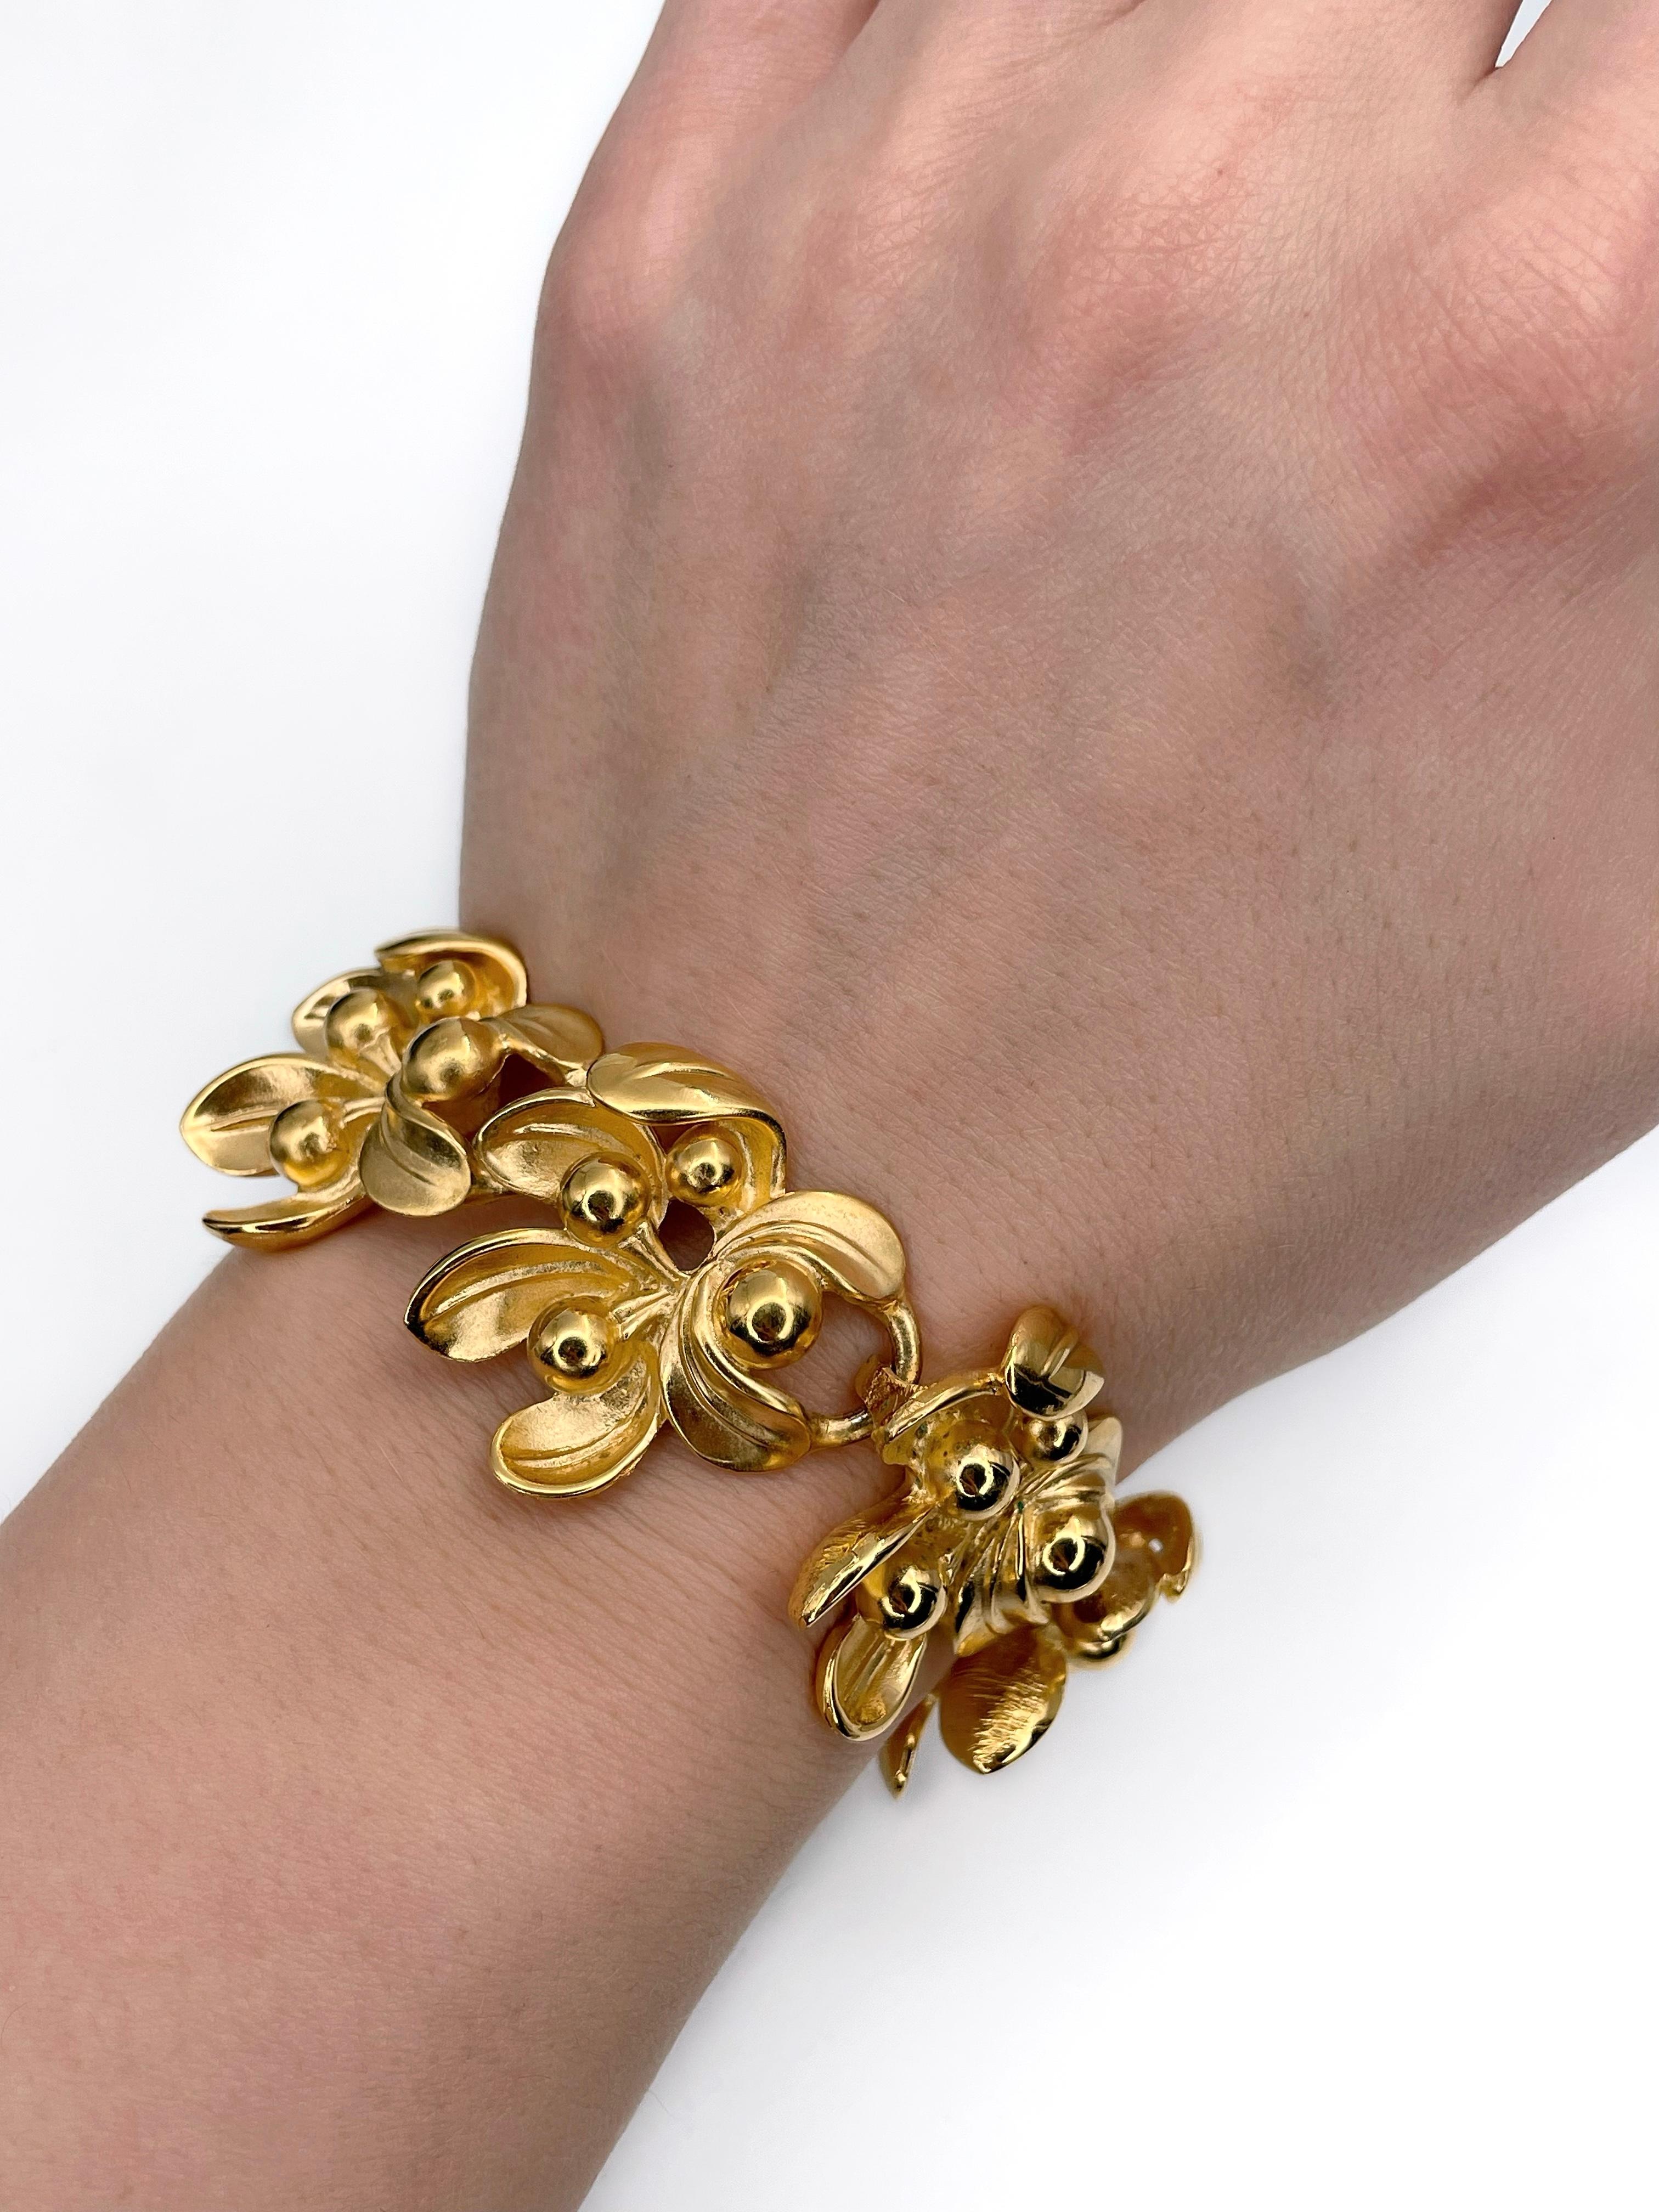 This is a gold tone floral design bracelet created by Lanvin in 1990’s. The piece is gold plated. 

Markings: “Lanvin. Germany” (shown in photos).

Length: 18.5cm
Width: ~2.7cm

———

If you have any questions, please feel free to ask. We describe